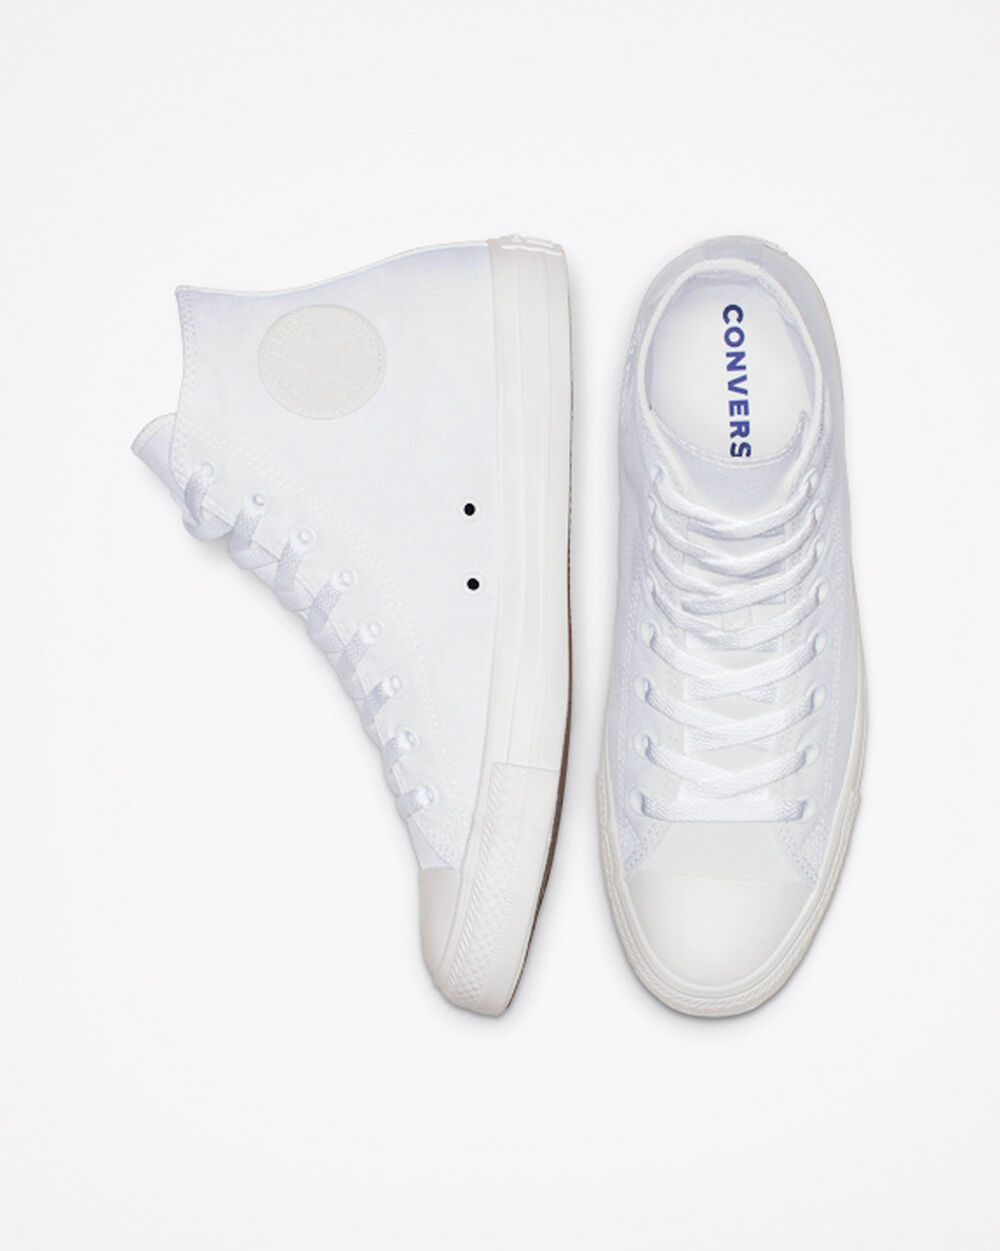 Tenis Converse Chuck Taylor All Star Mujer Blancos | Mexico-458666